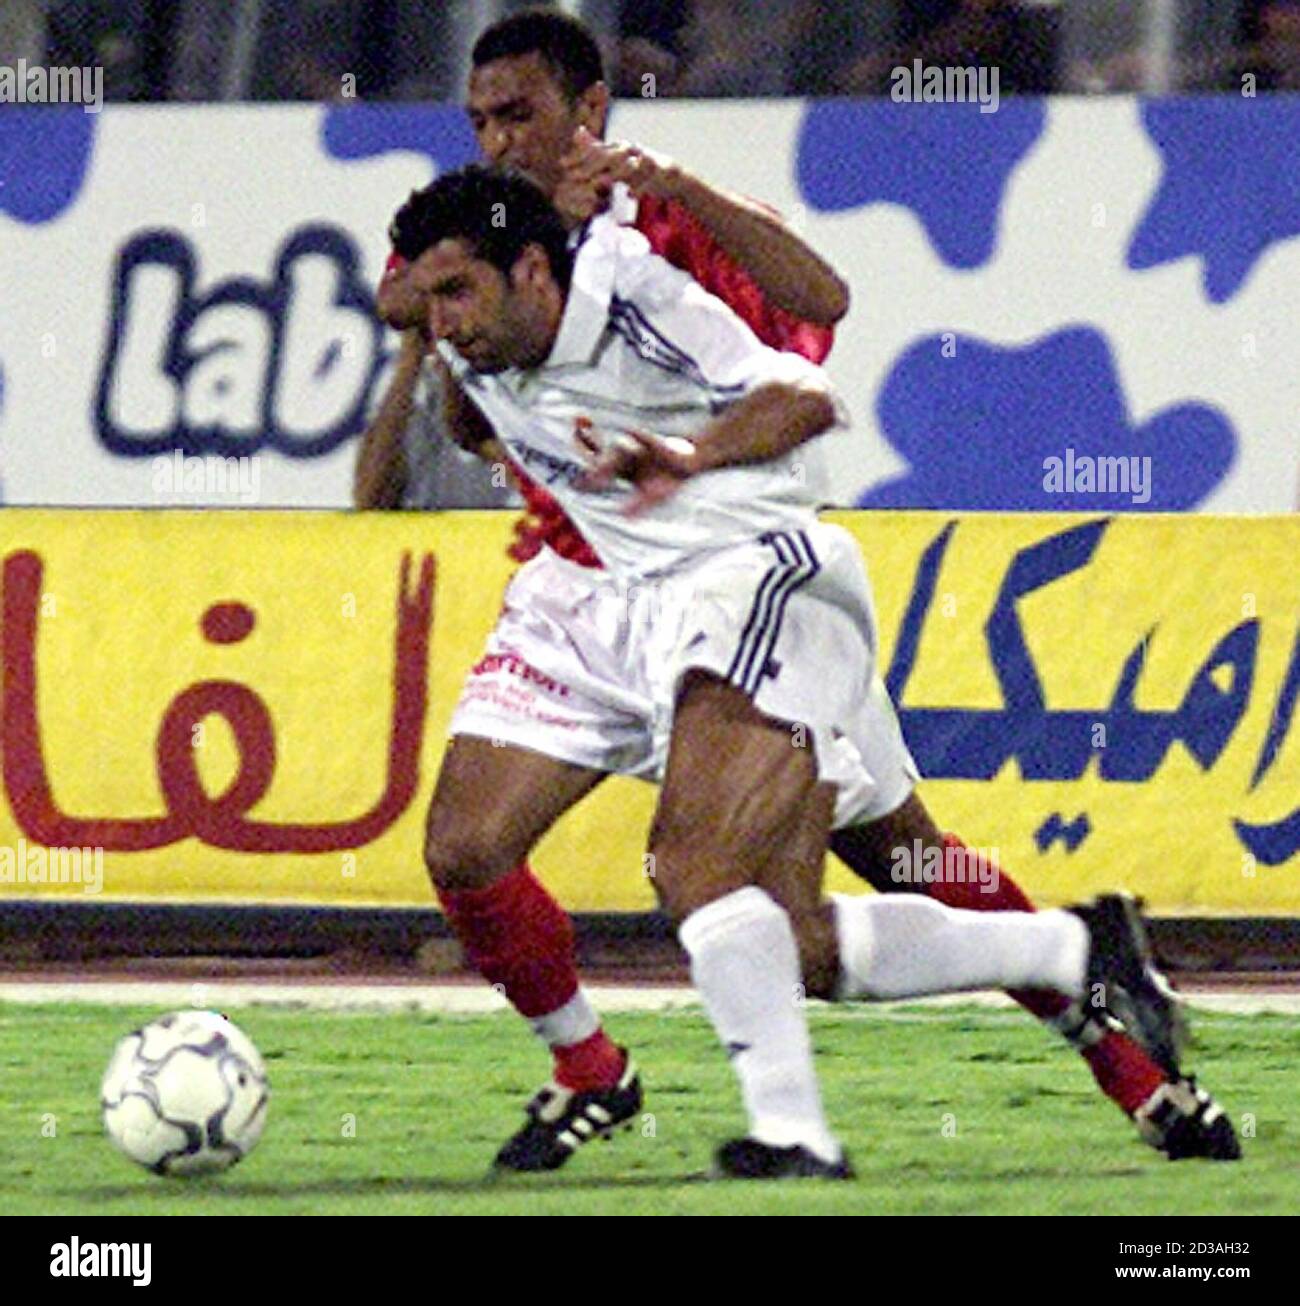 Real Madrid soccer player Luis figo (front) slips away from Egyptian  al-Ahli defender Abu-Maged Mostafa during a friendly match in Cairo August  4, 2001. Both soccer teams Real Madrid and al-Ahli were